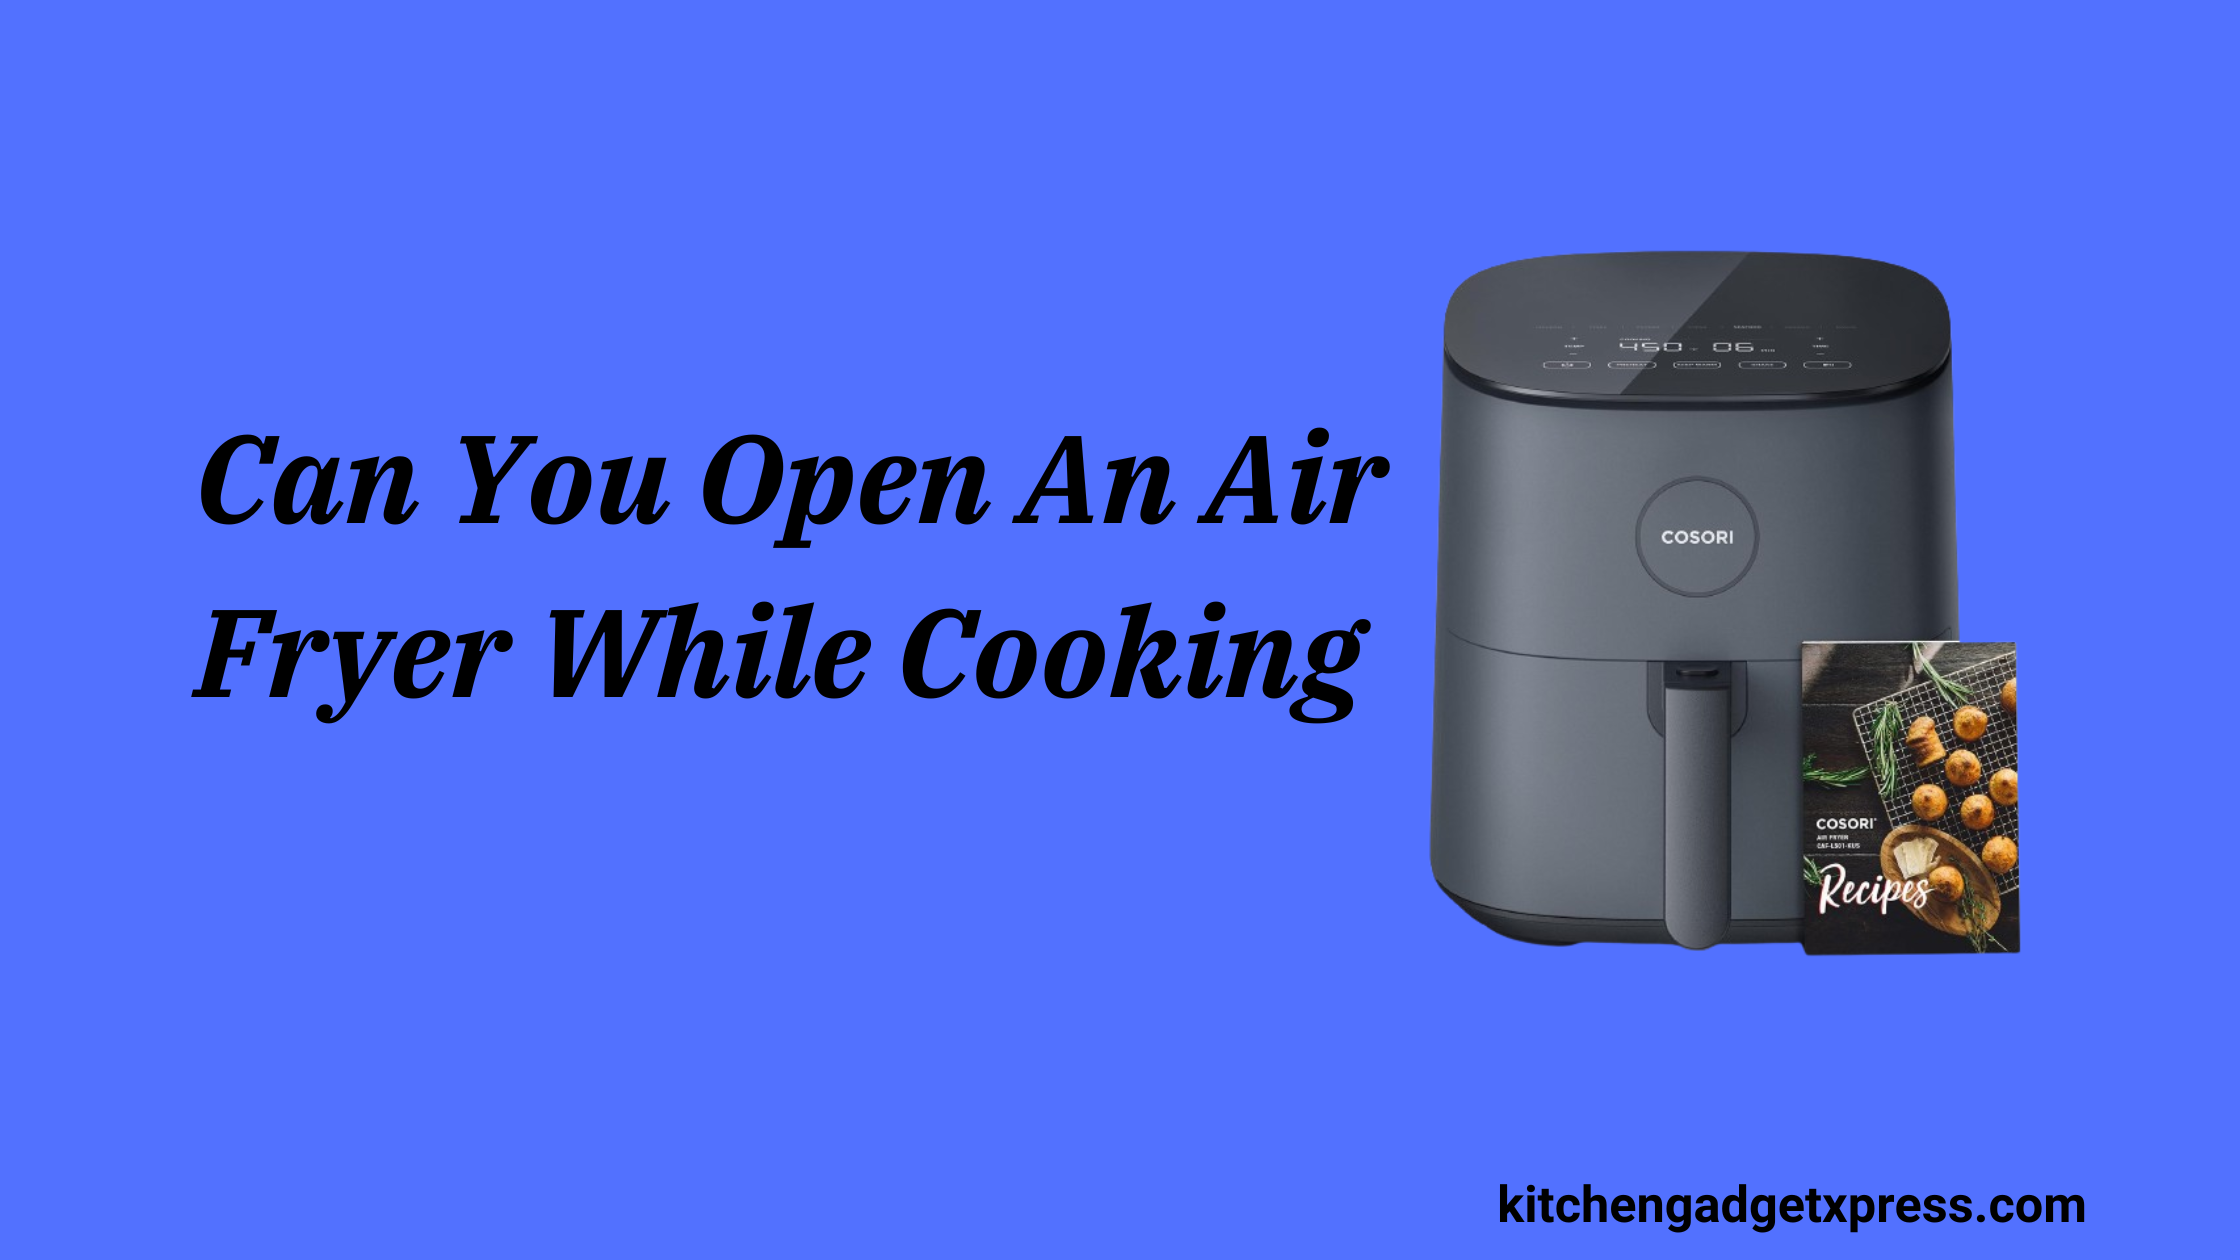 Can You Open An Air Fryer While Cooking